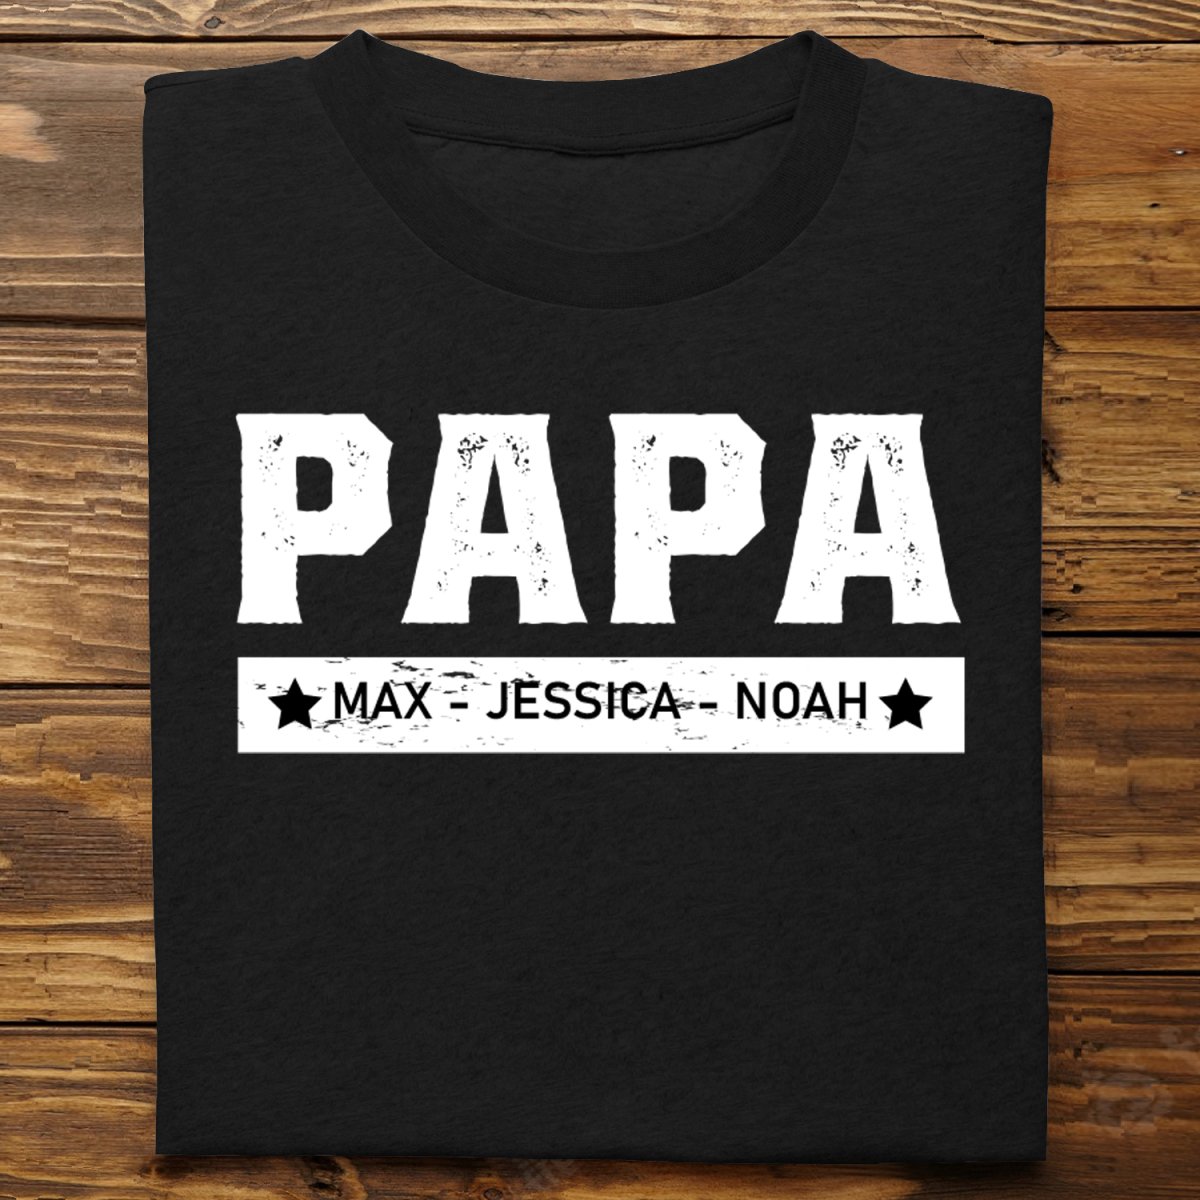 Discover Family - With Kids Names Custom Papa - Personalized Unisex T-shirt